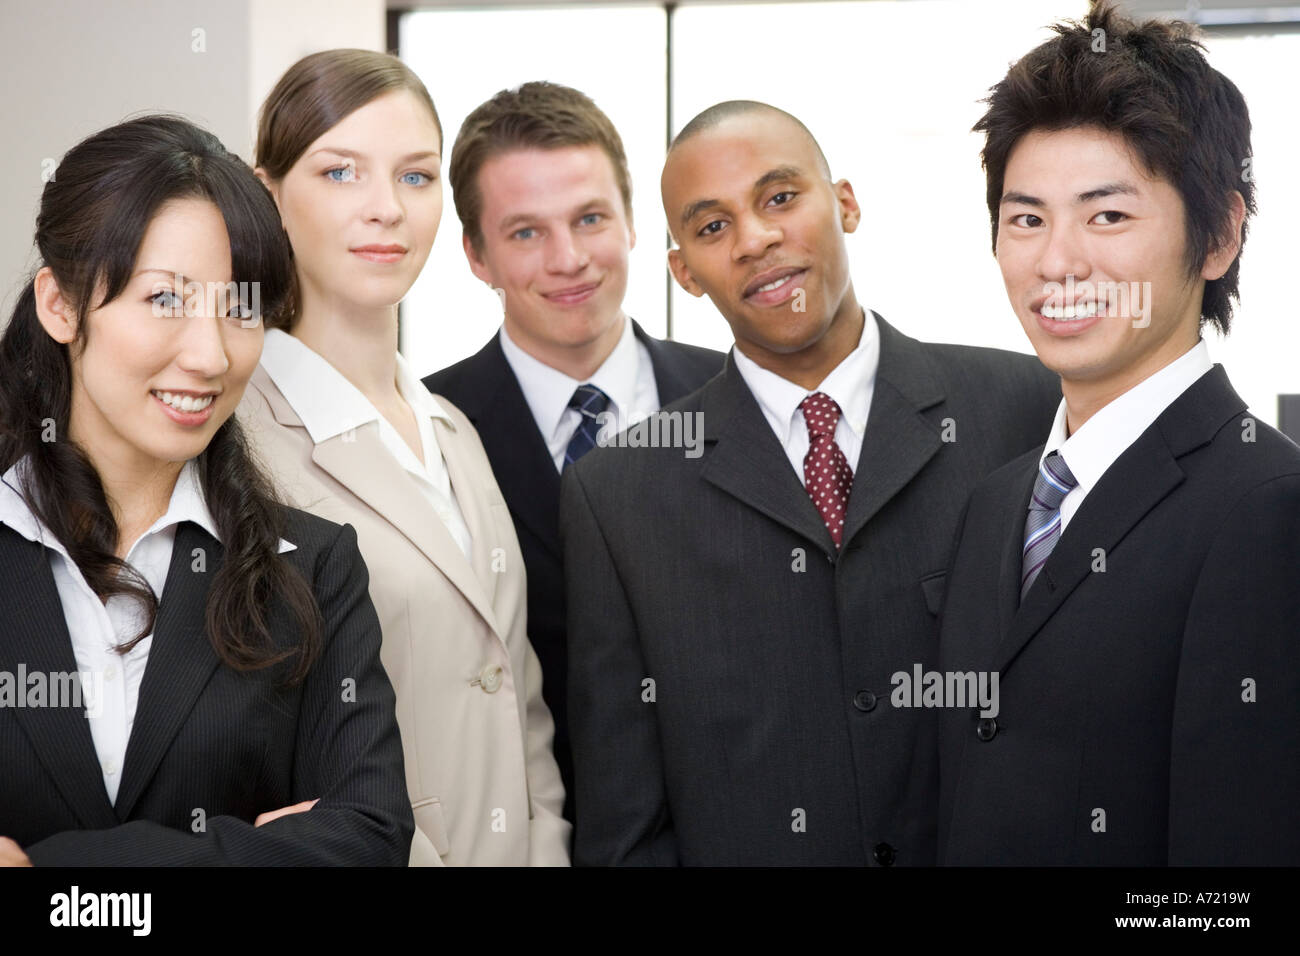 Group of business people looking at camera Stock Photo